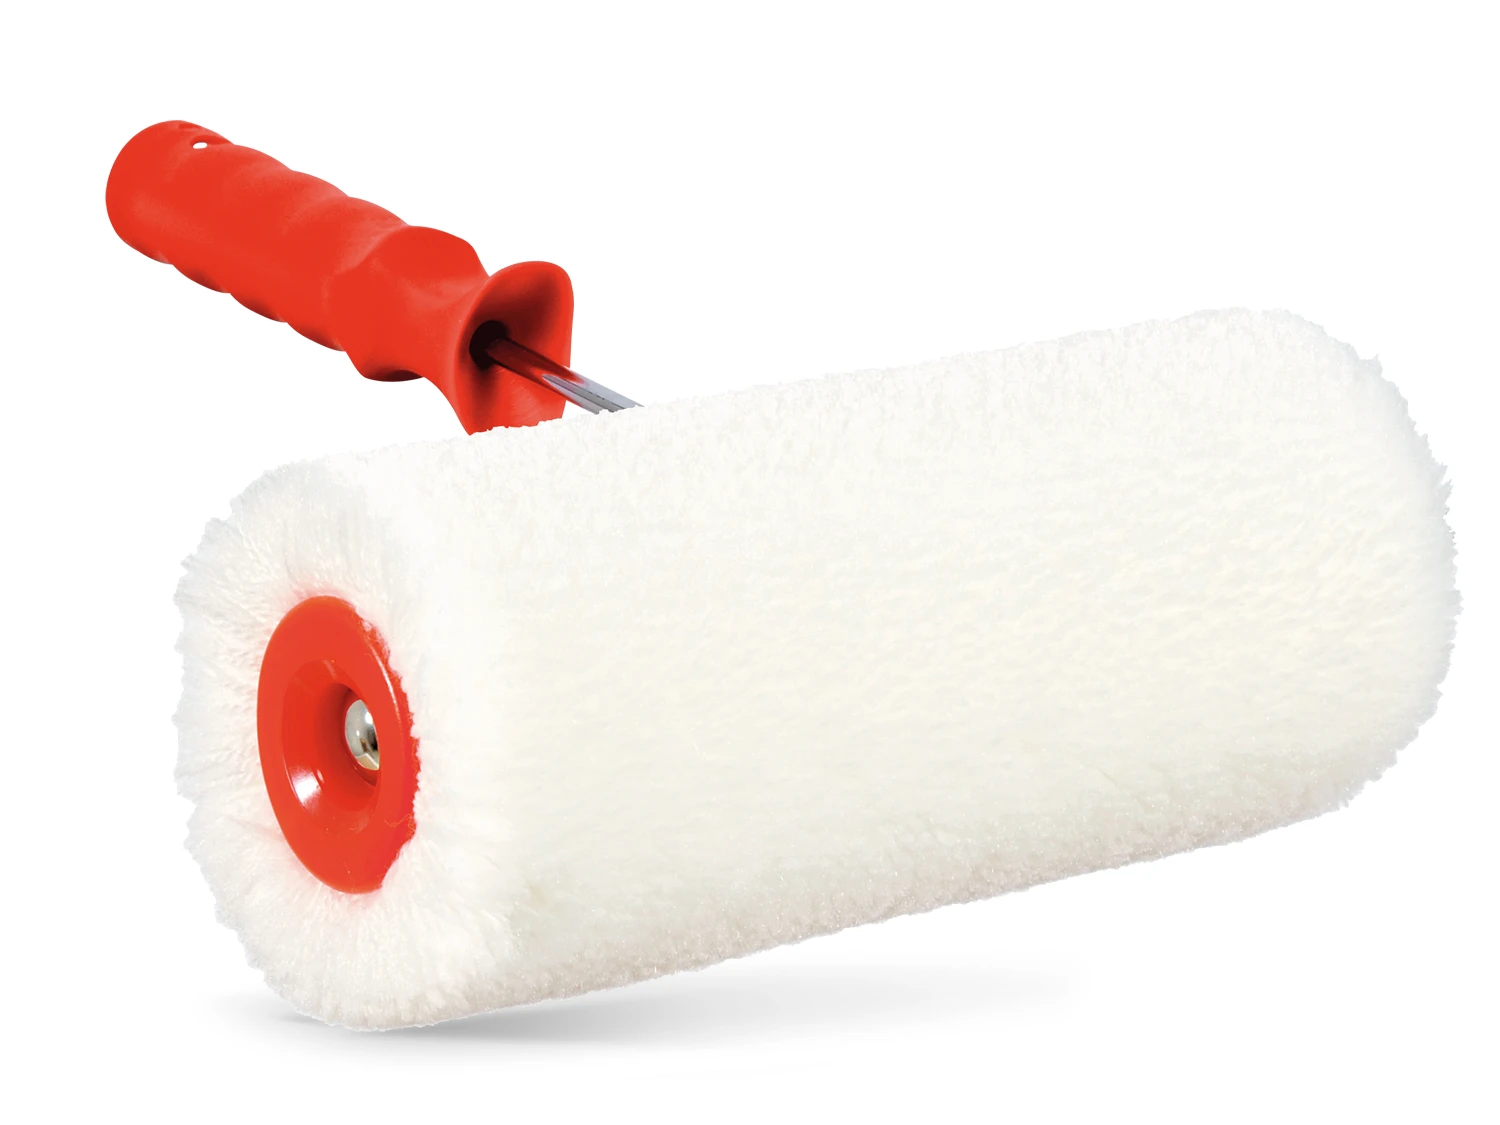 A09 – TWISTED ACRYLIC PAINT ROLLER